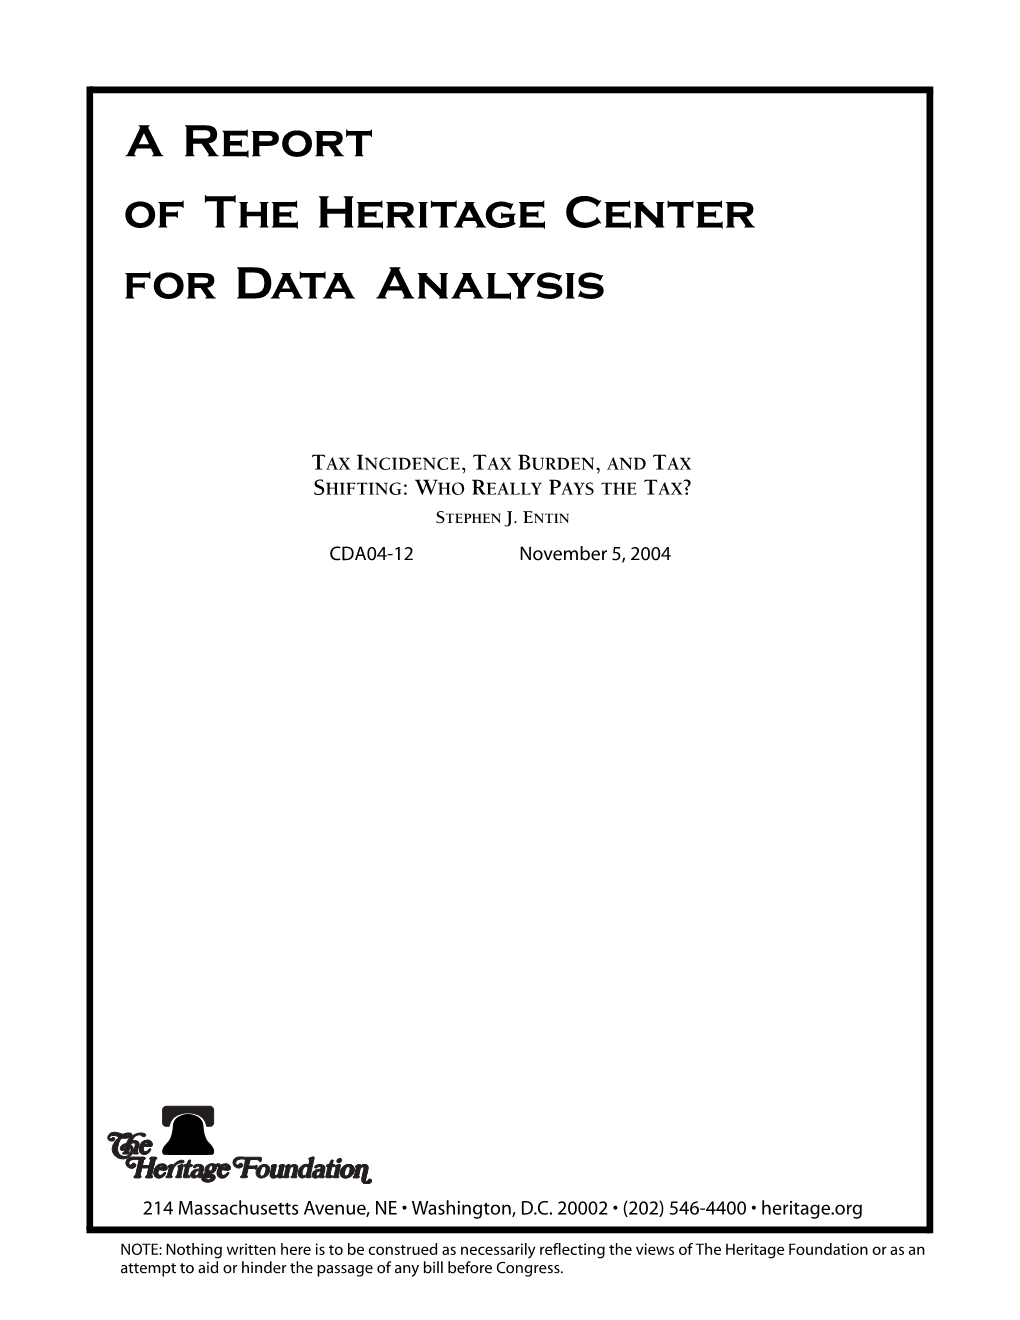 A Report of the Heritage Center for Data Analysis a Report of The